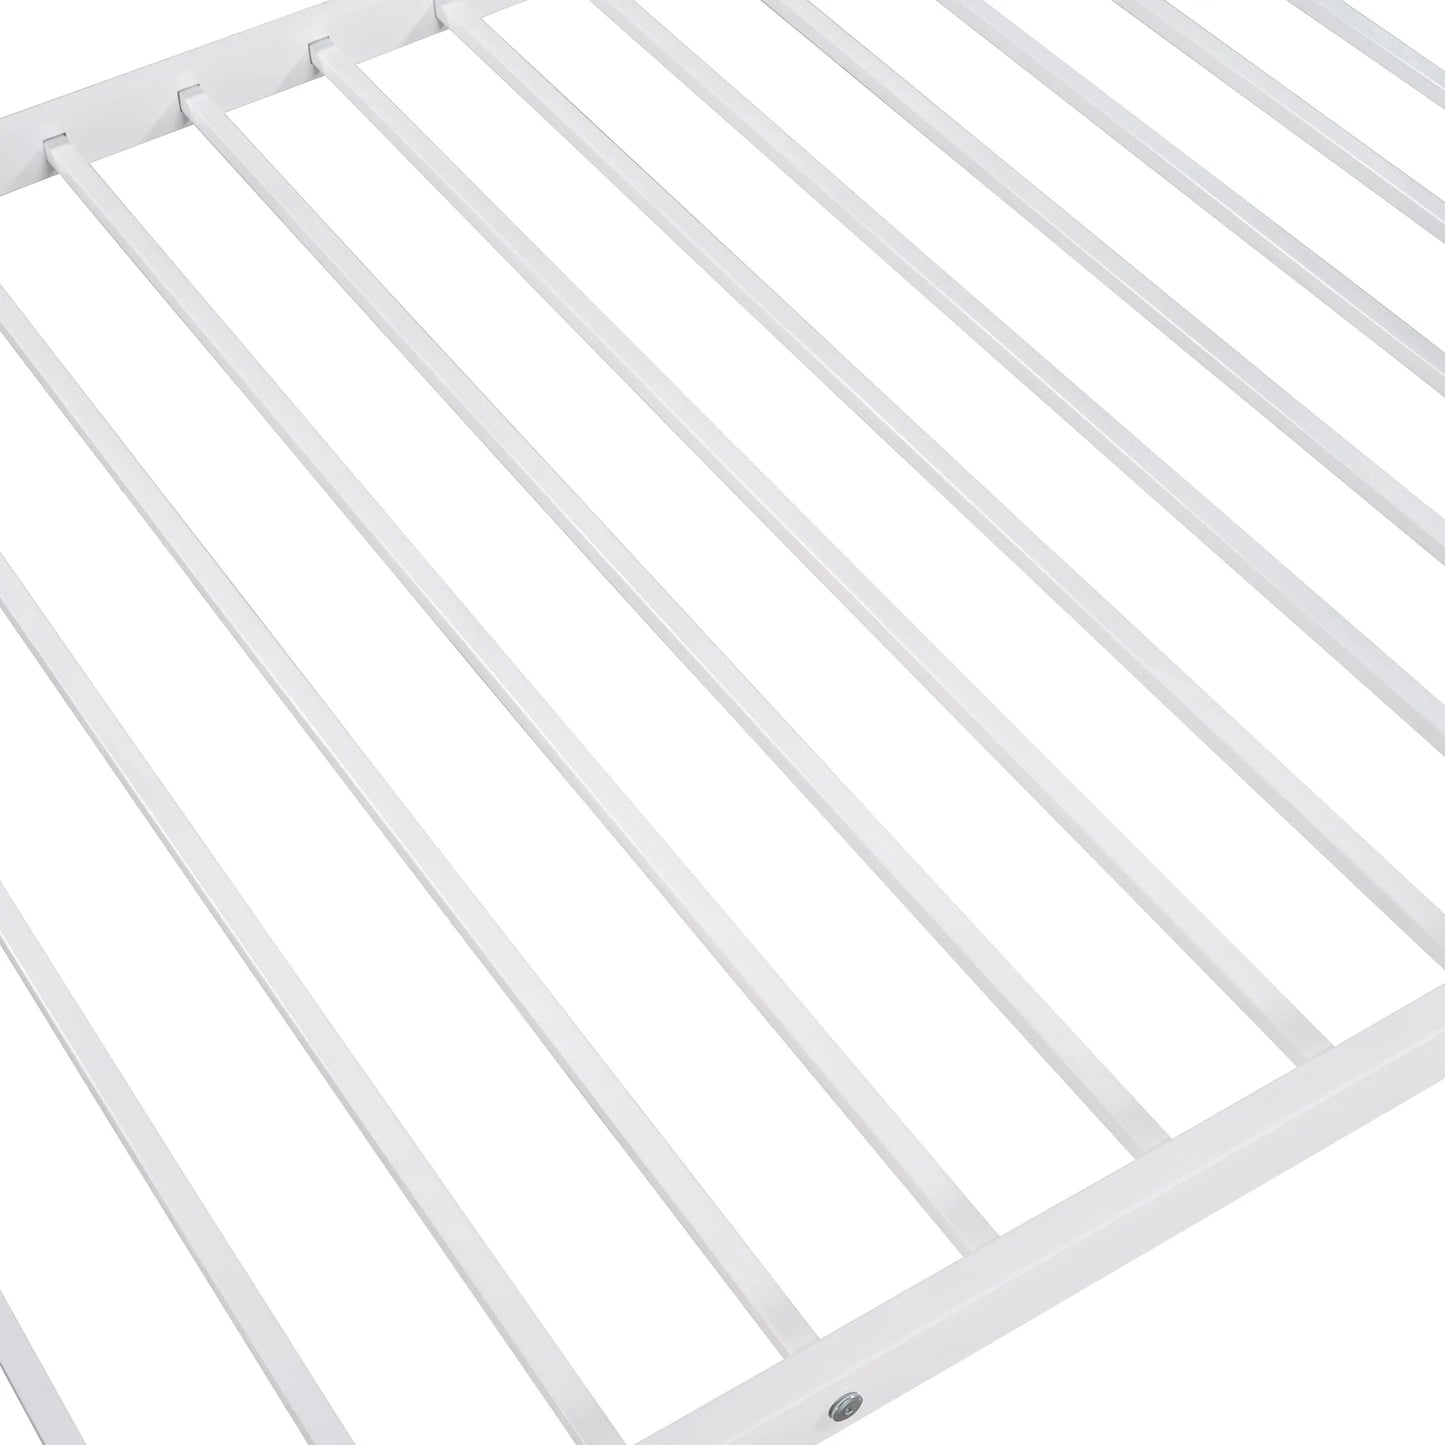 Metal Bunk Bed Twin Size  in White